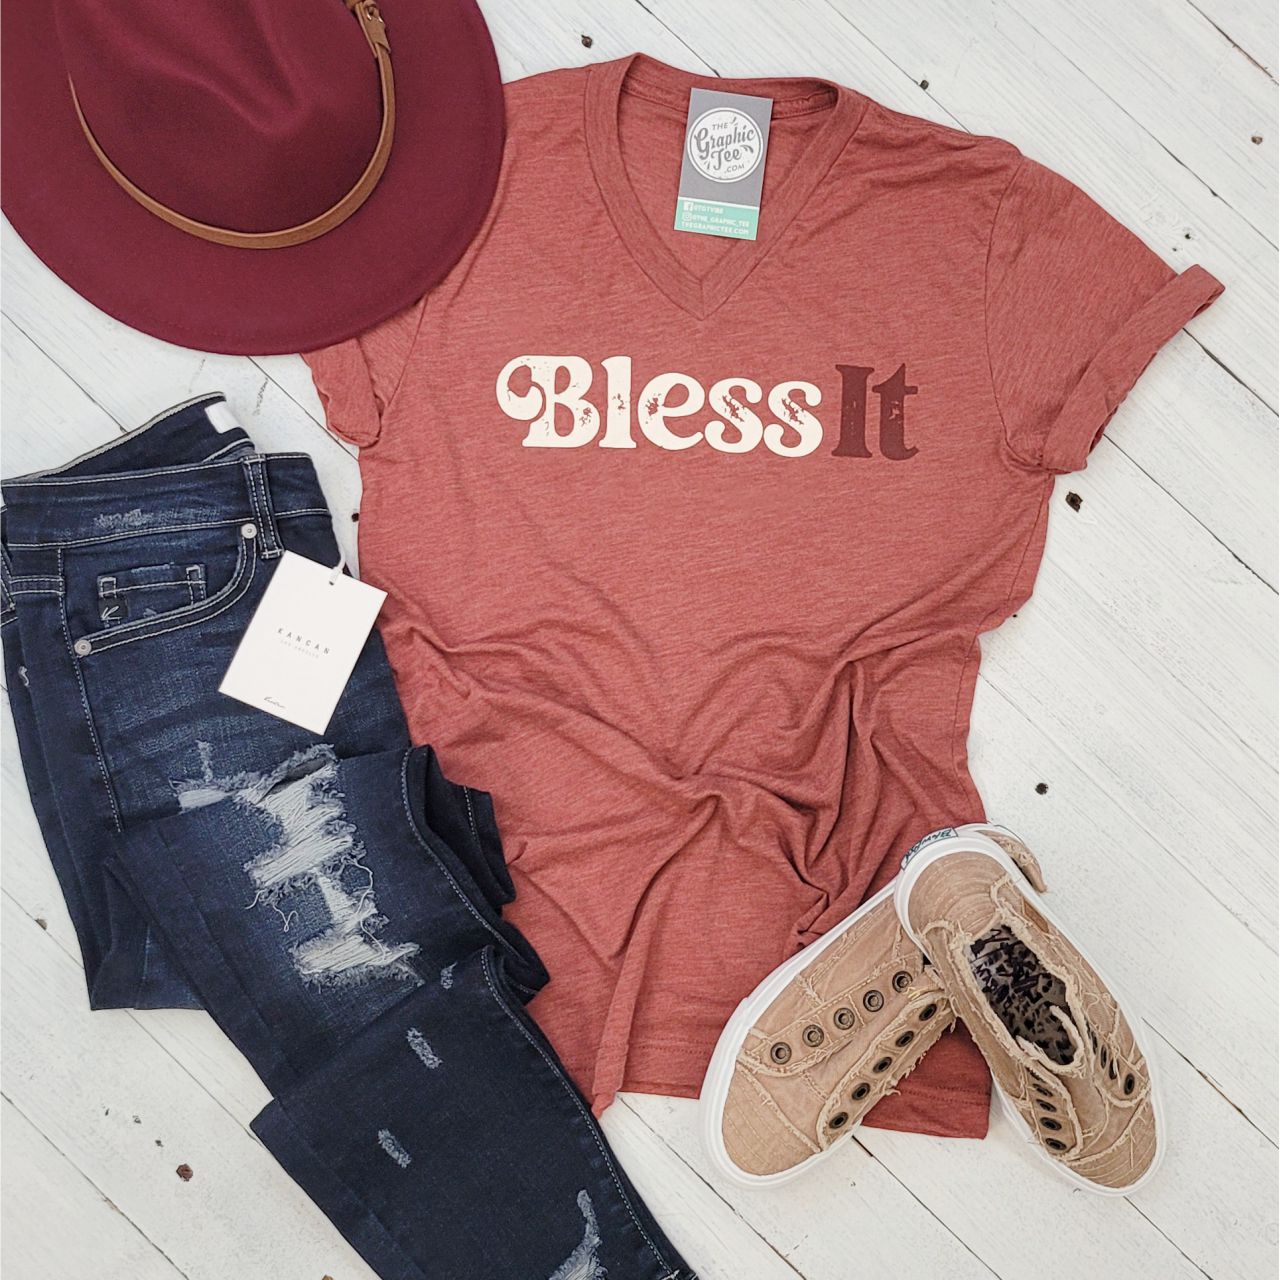 *WHOLESALE* Bless It V Neck Tee - The Graphic Tee